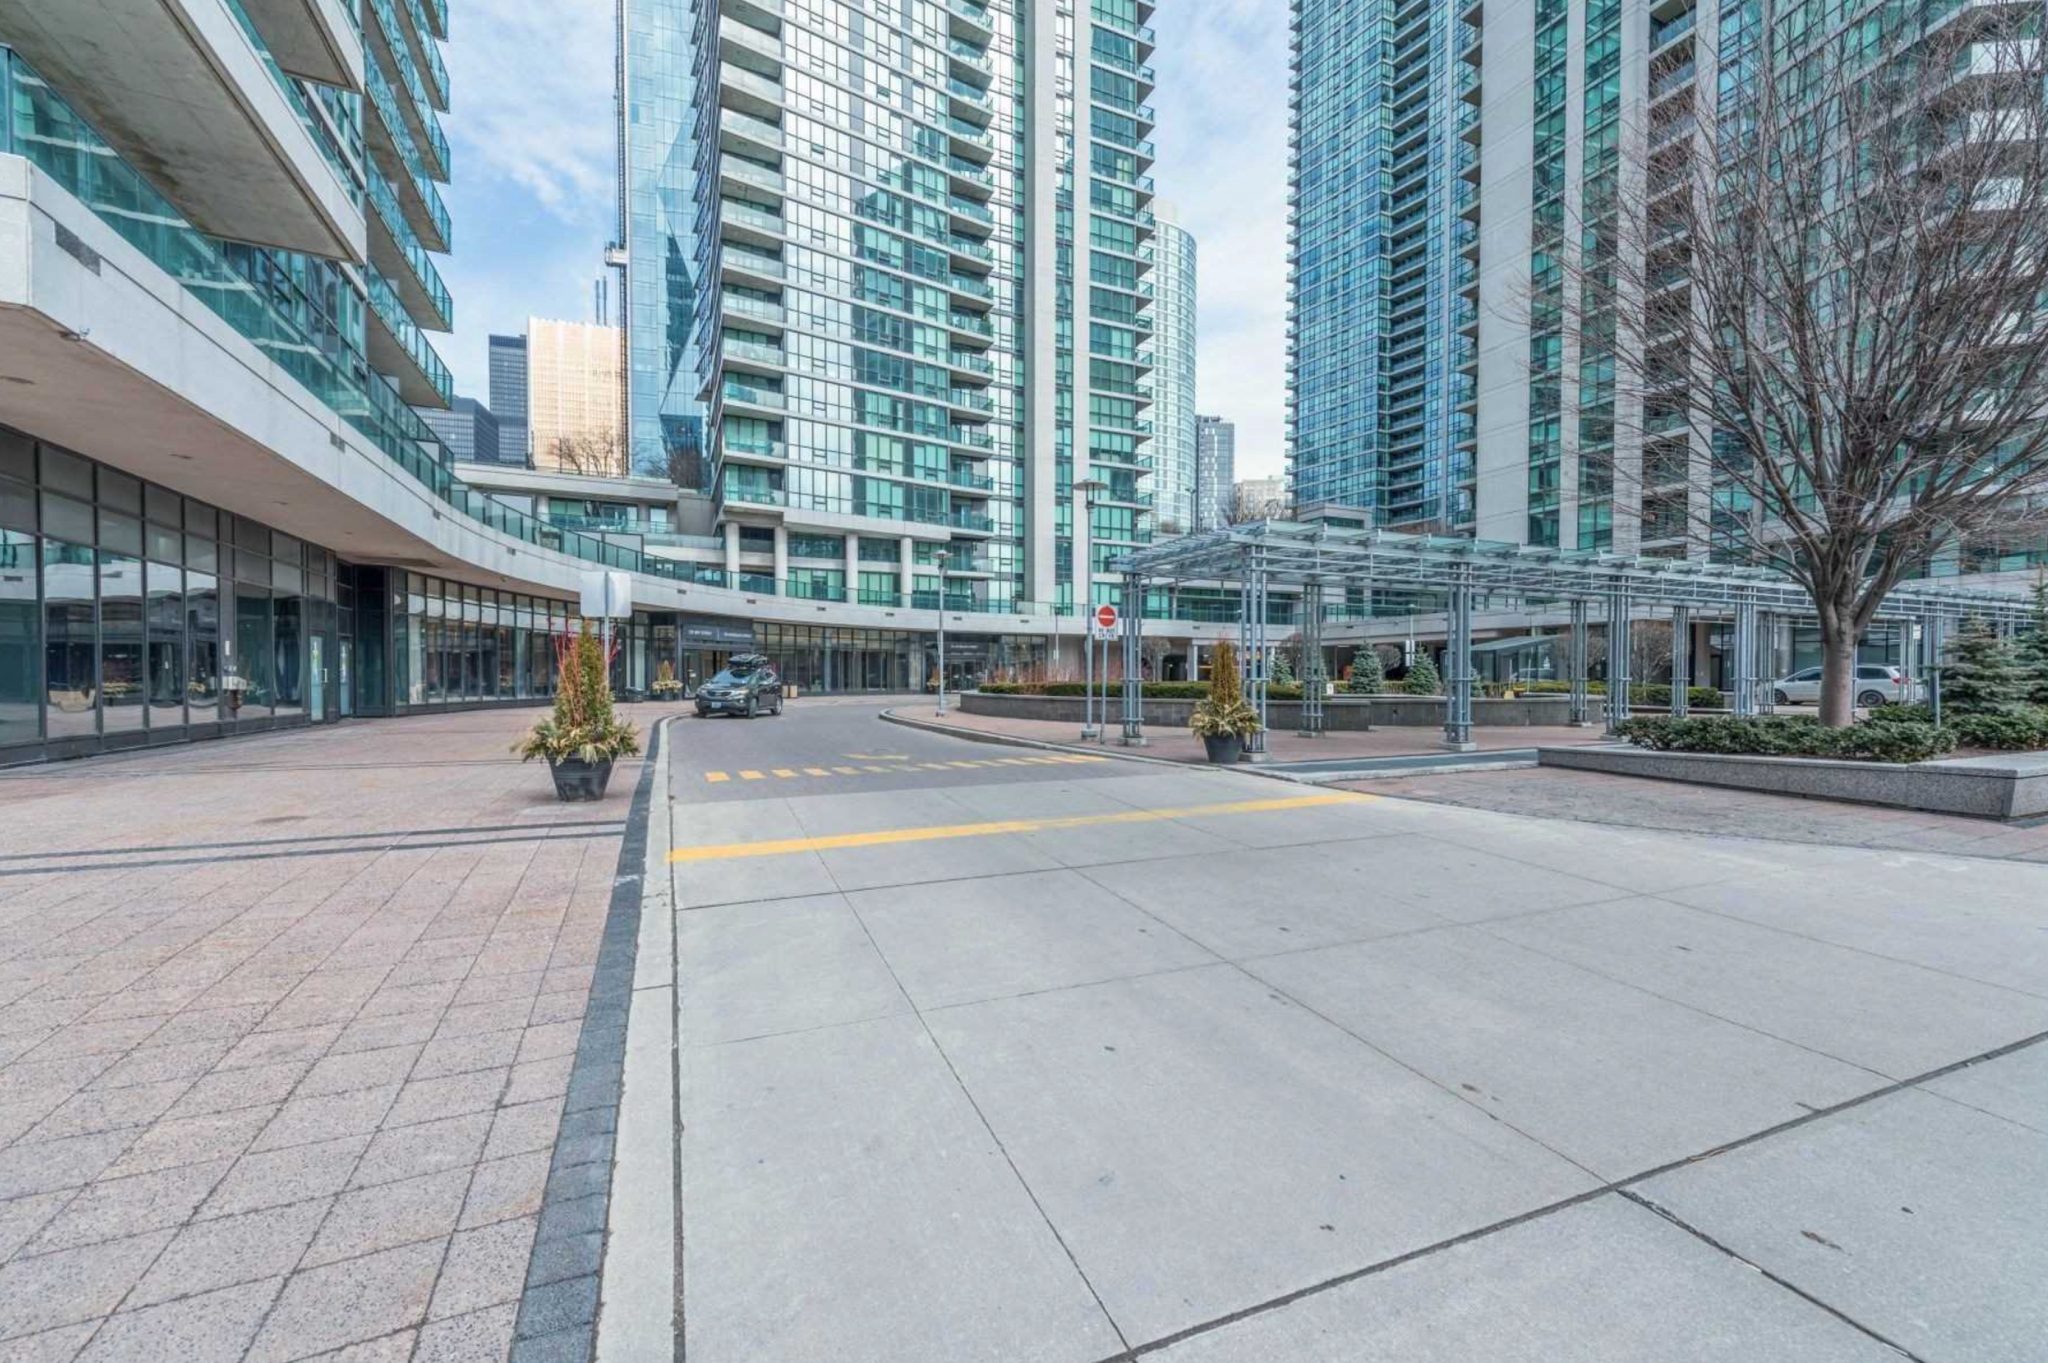 33 Bay on Pinnacle. Condo Management Best Practice. Del Property Management. Toronto